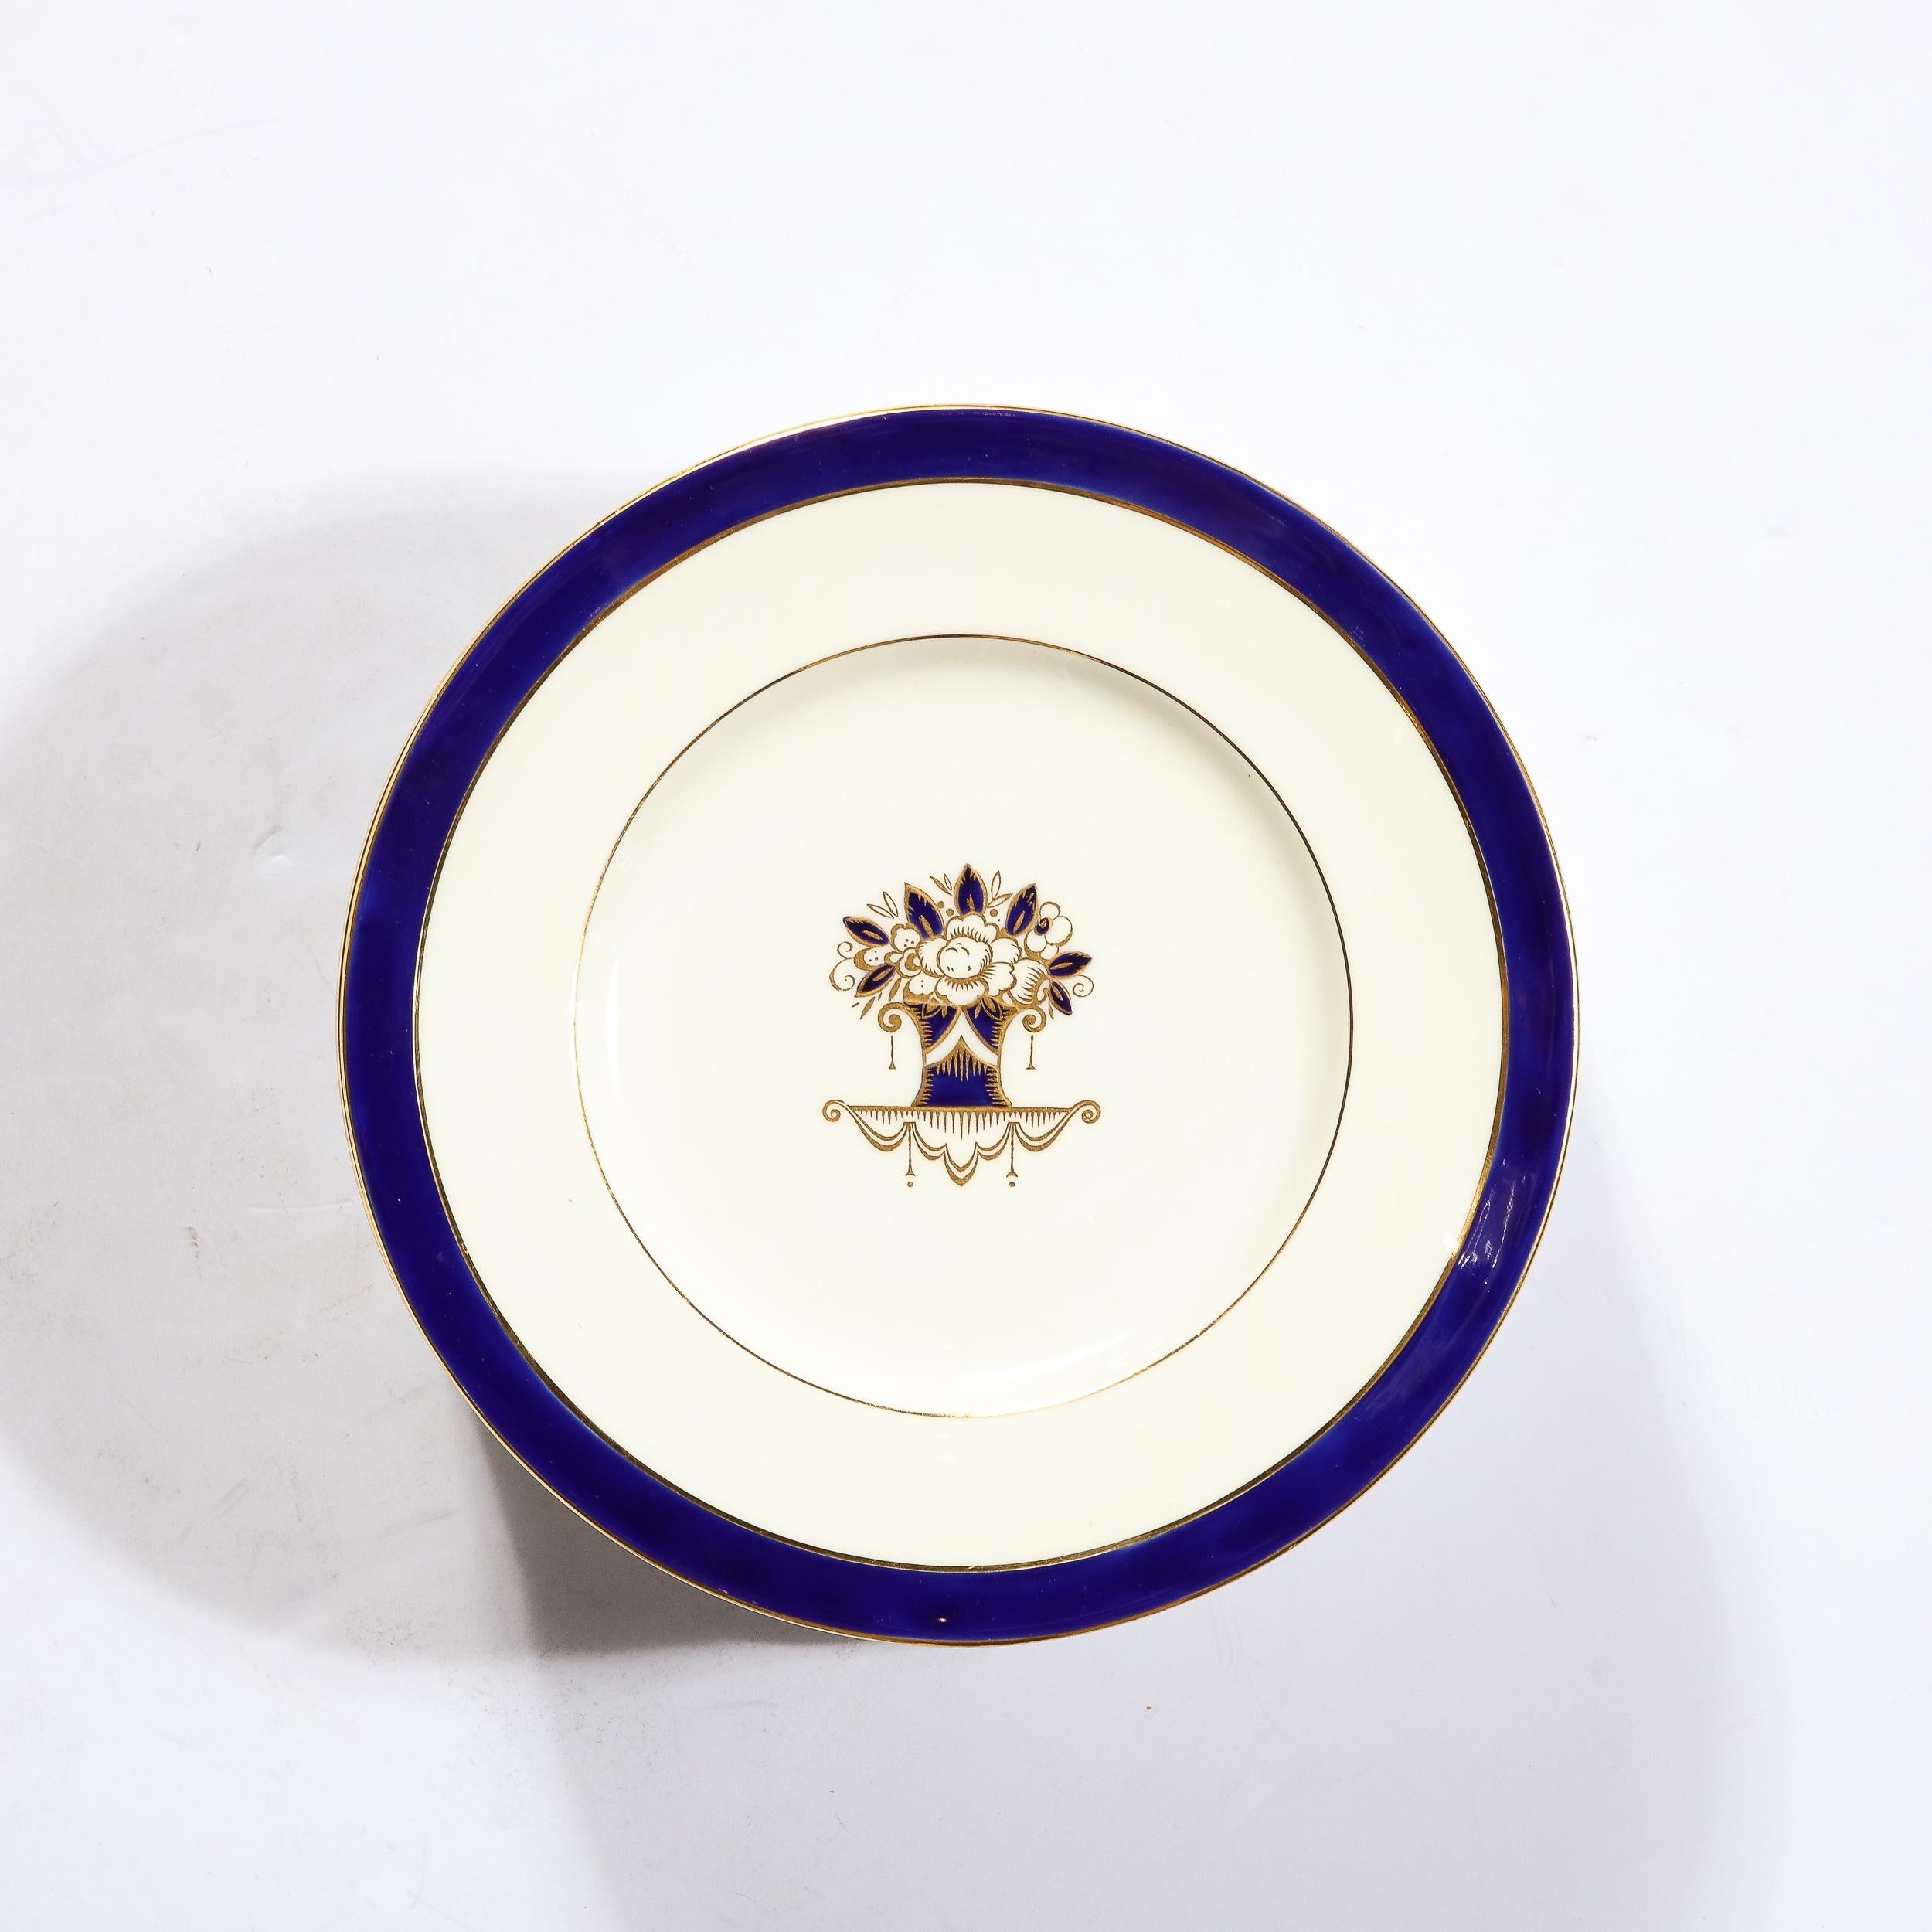 This elegant set of 12 Art Deco plates were realized by Minton for the esteemed American luxury maker Tiffany in England circa 1930. They feature circular bodies with subtly raised cobalt borders and gilded perimeters. The cream interior of each